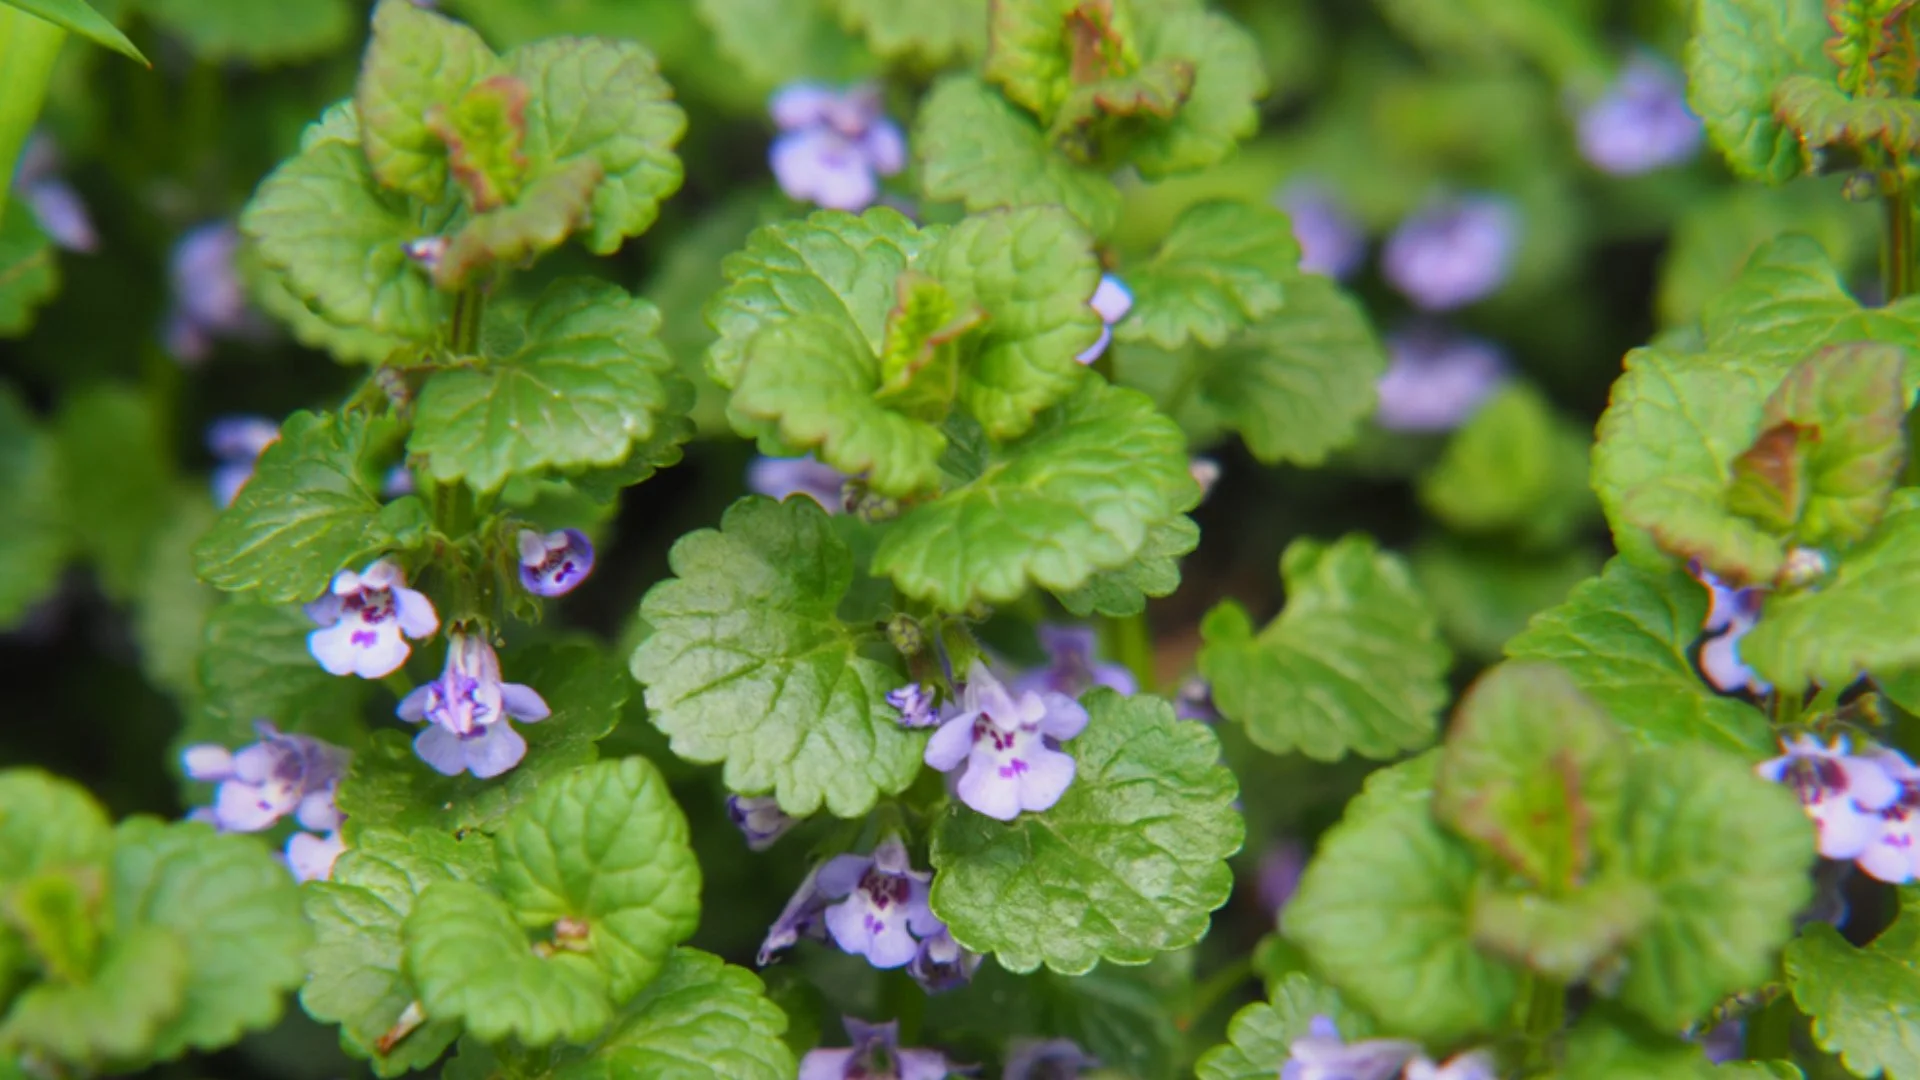 Ground Ivy - What You Need to Know About This Weed & How to Control It